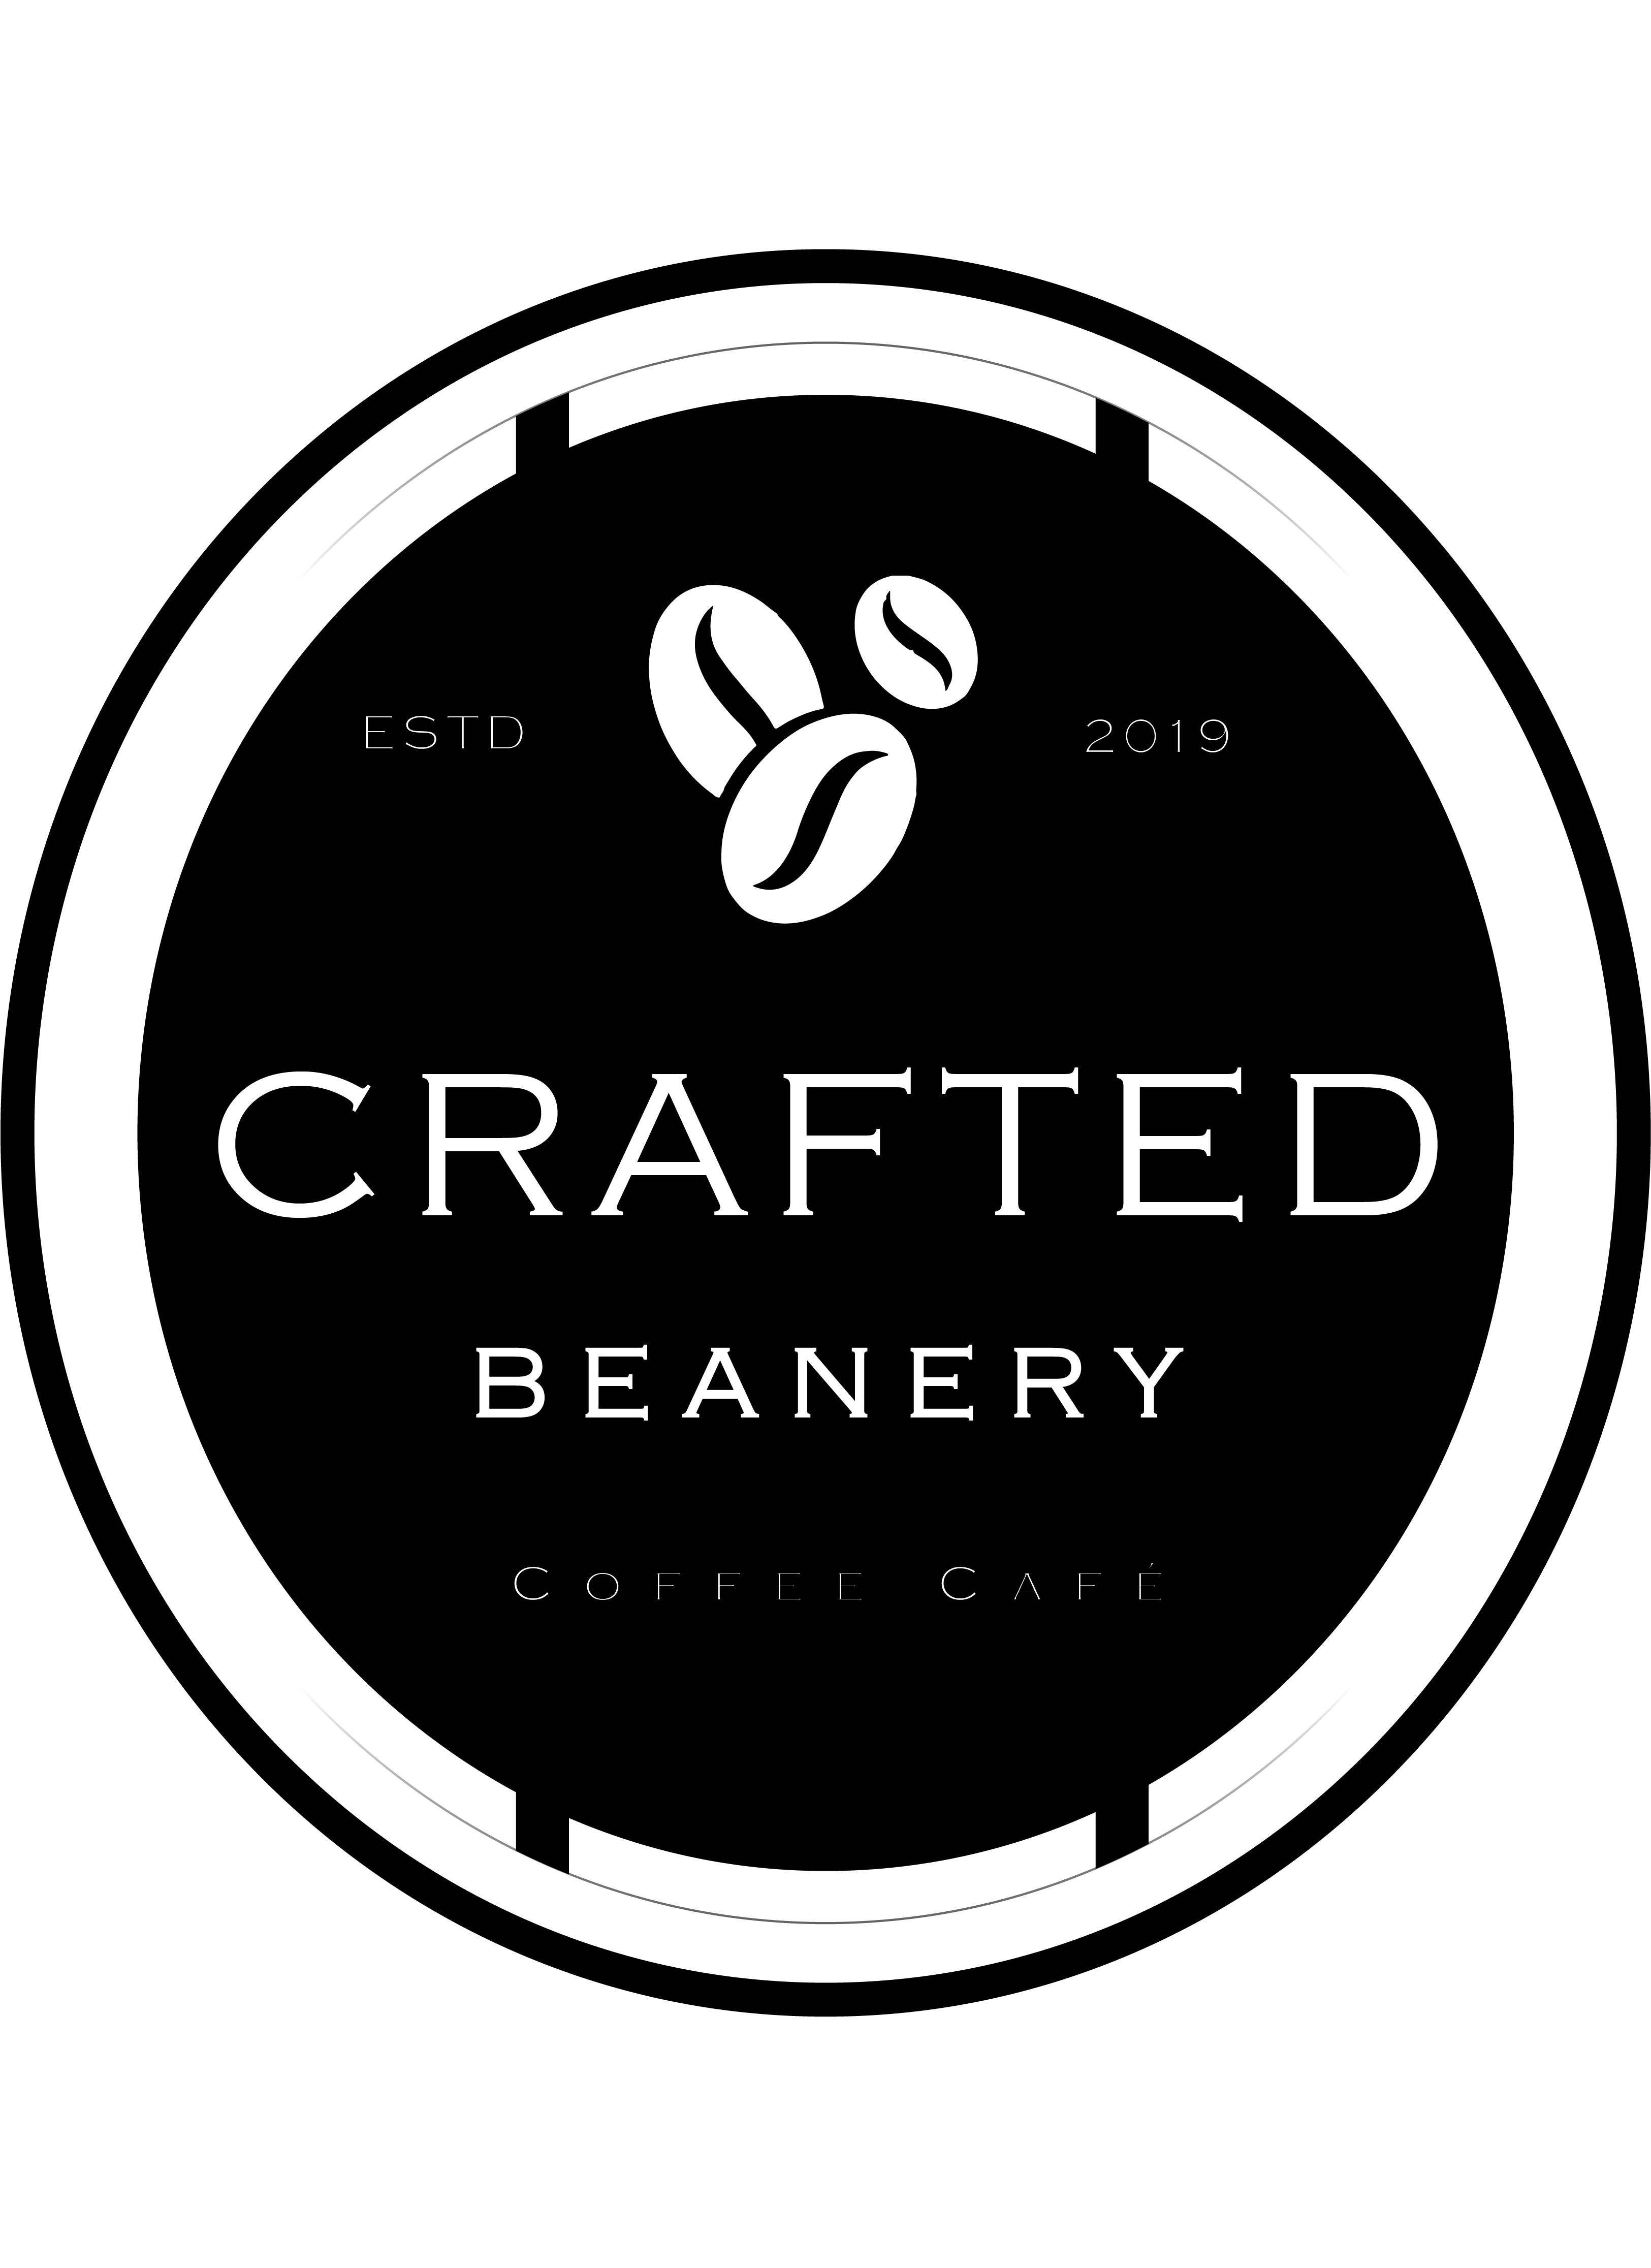 Crafted Beanery